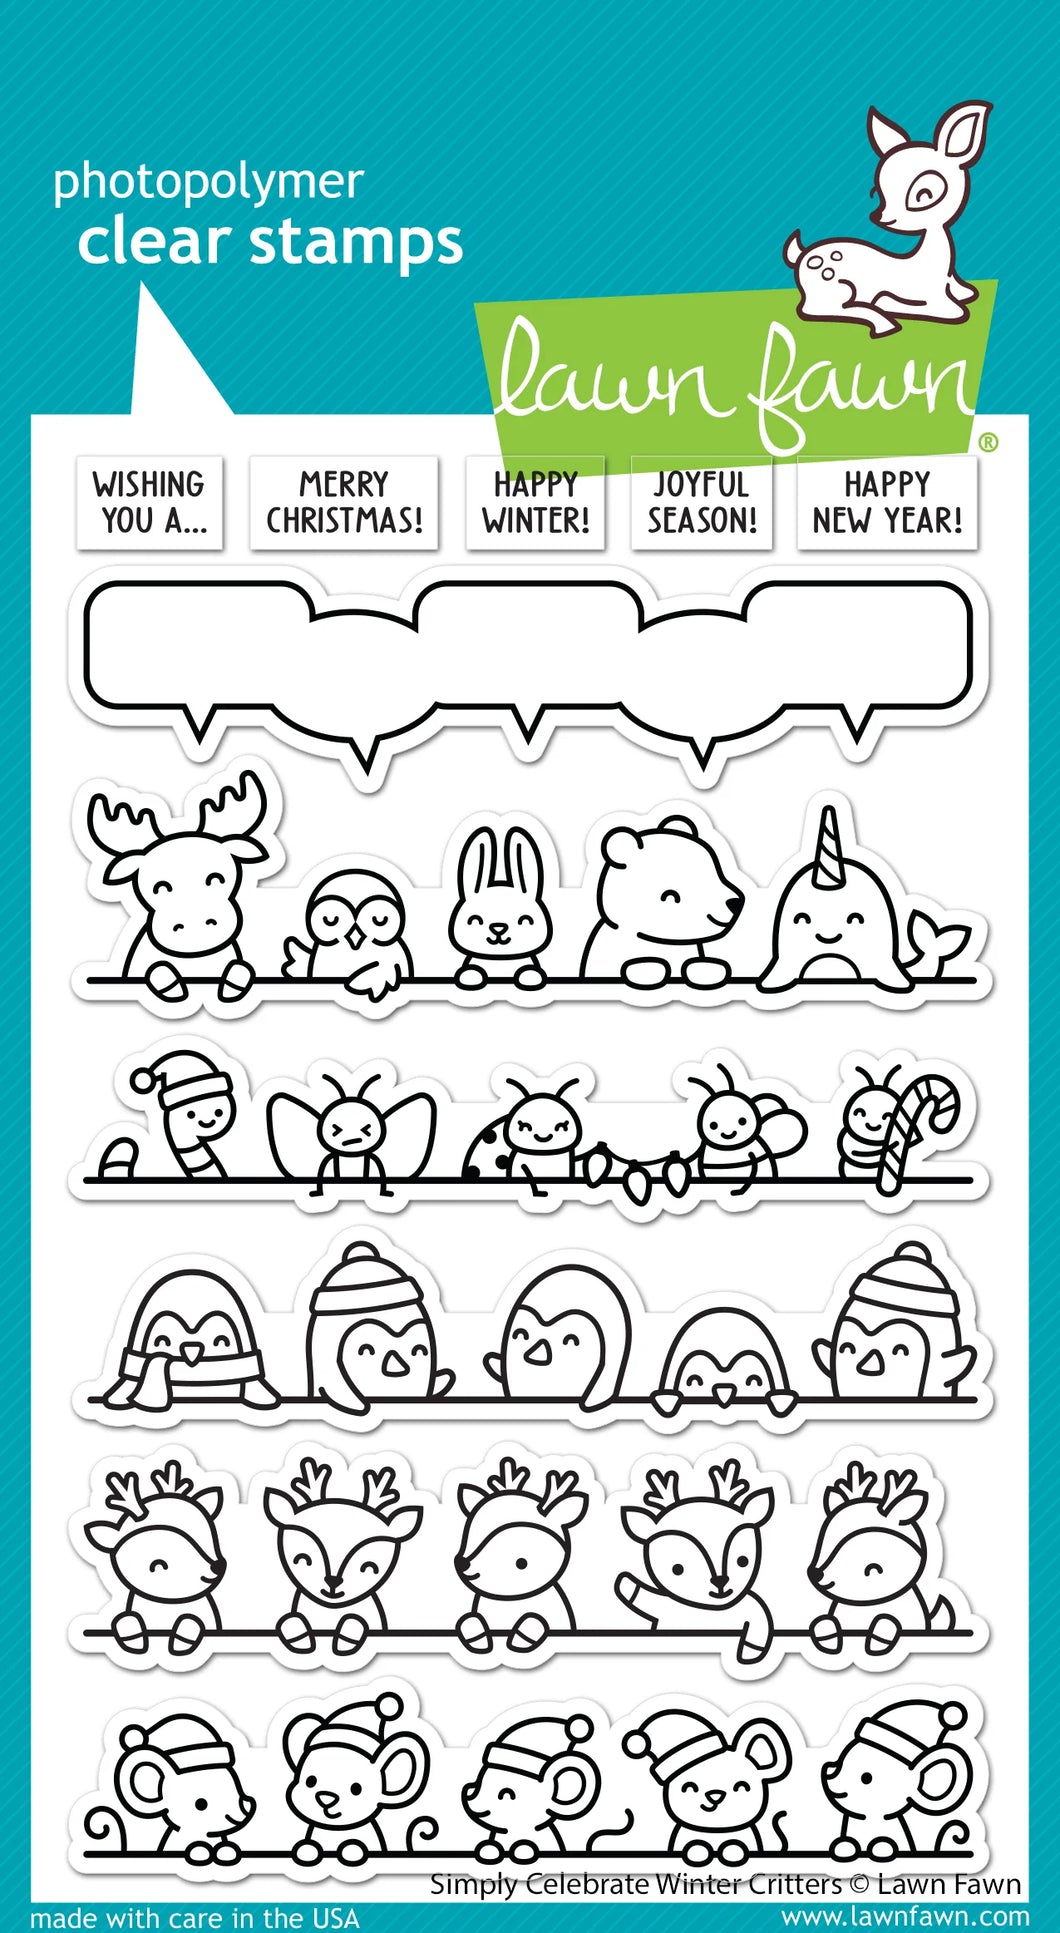 Lawn Fawn - simply celebrate winter critters - clear stamp set